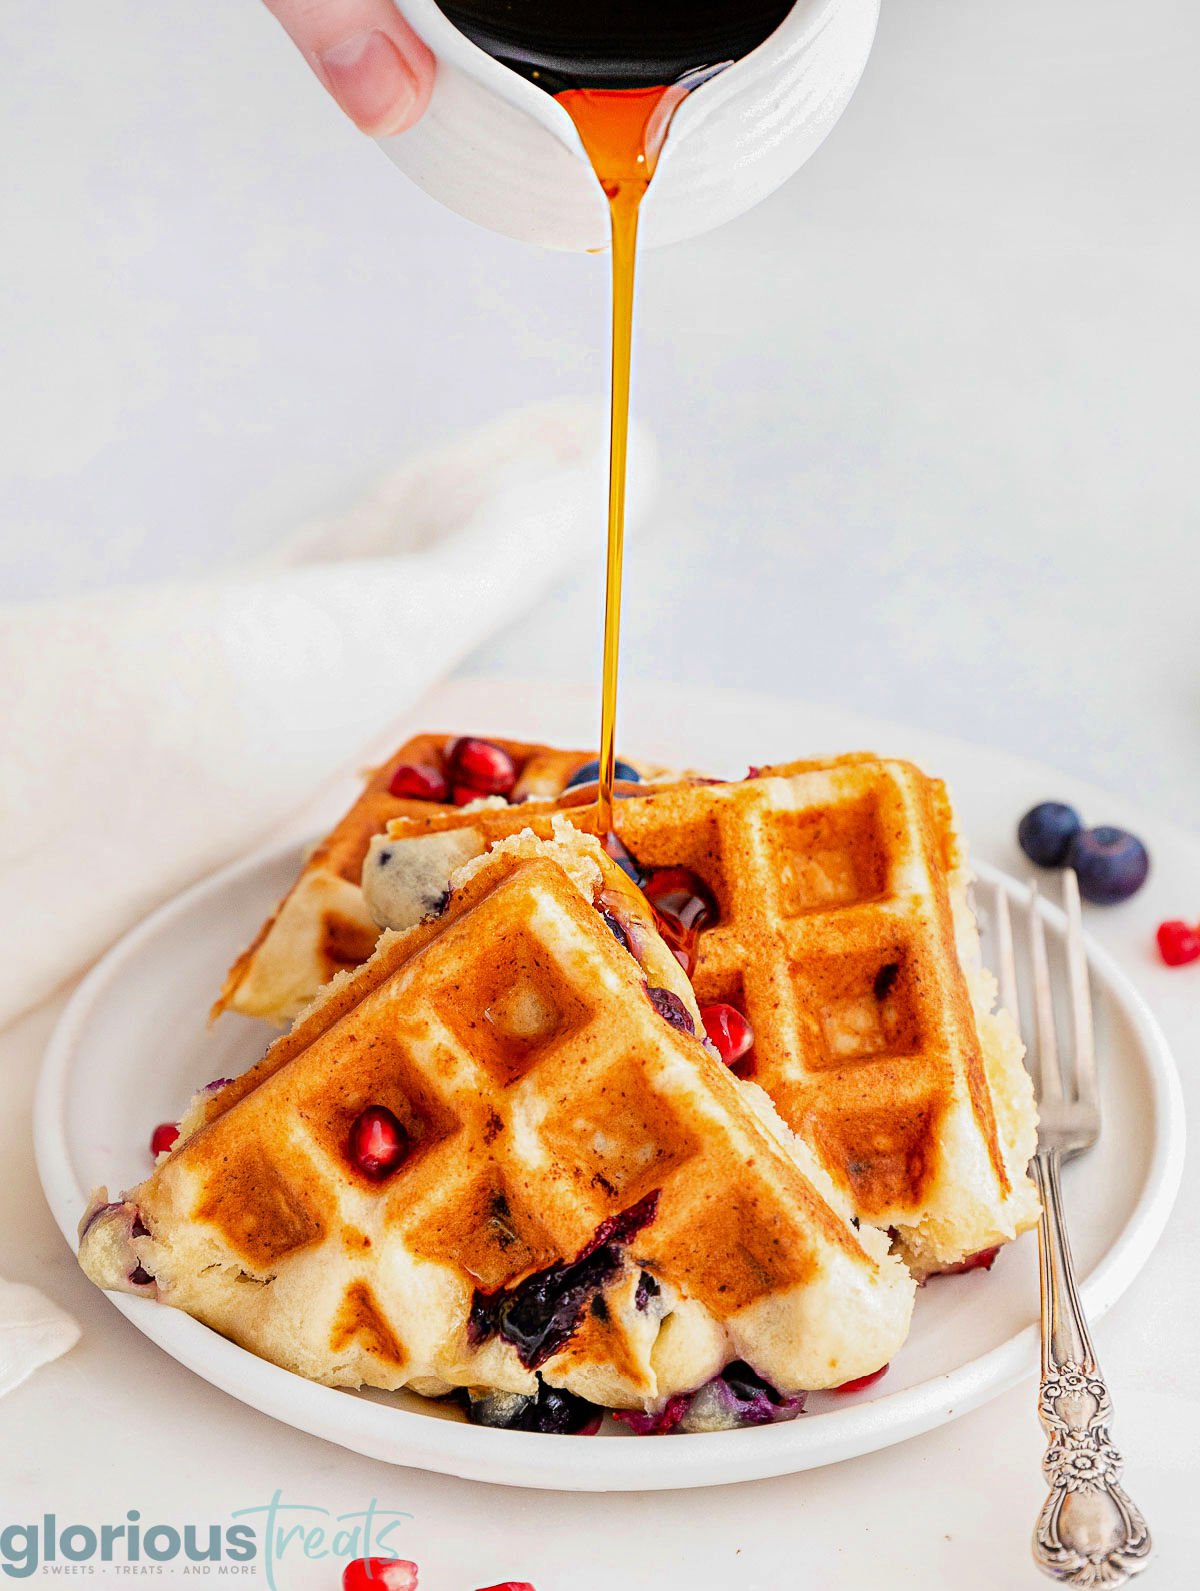 Syrup being drizzled over three blueberry waffles on a round white plate with a fork next to the waffles.